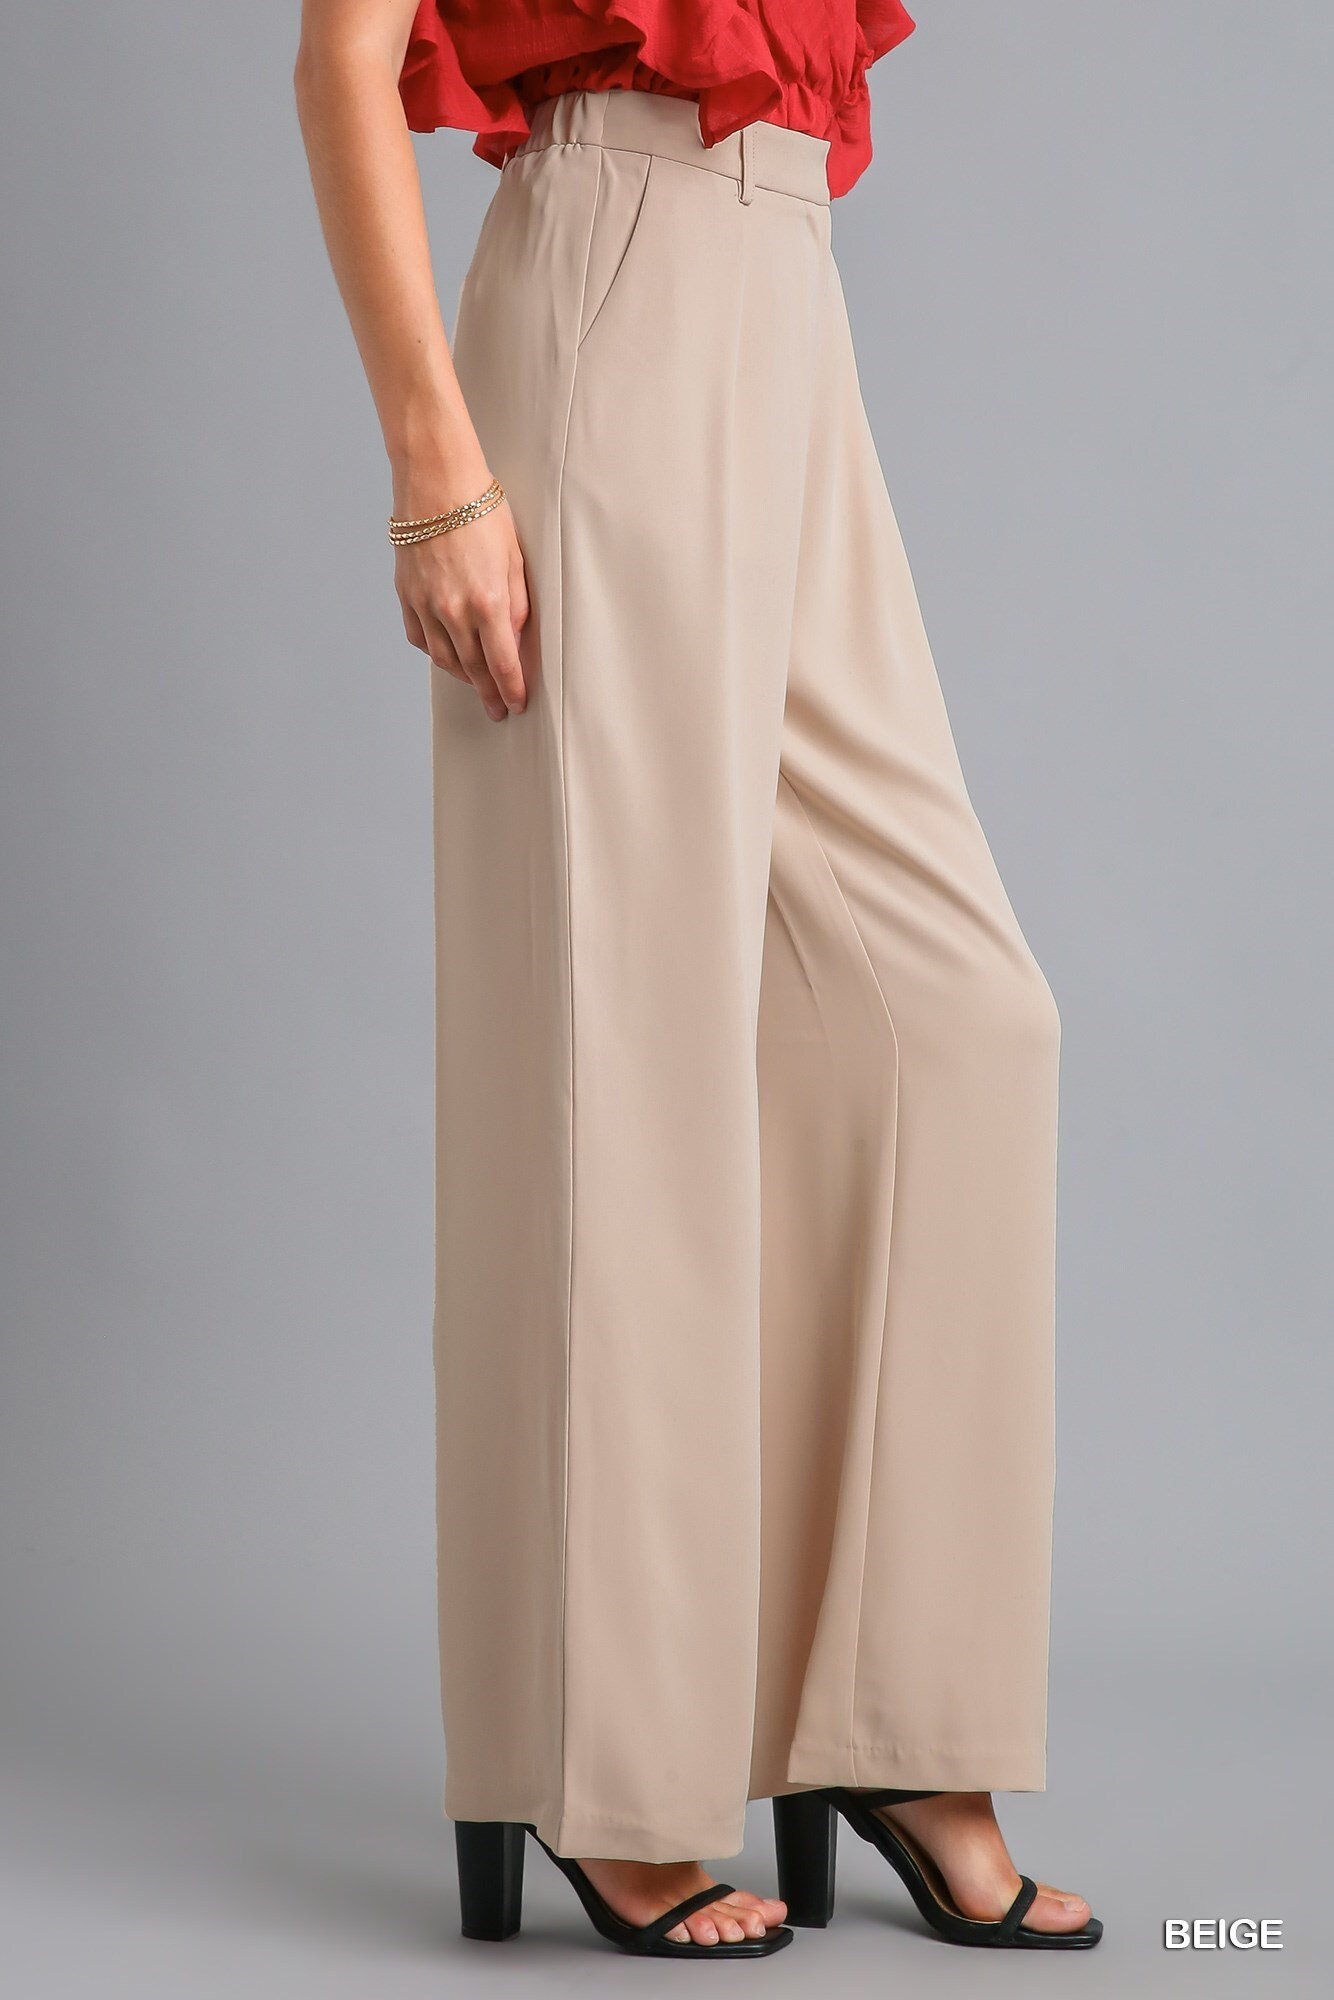 Palazzo Pants Guide for Women 5 foot Tall and under